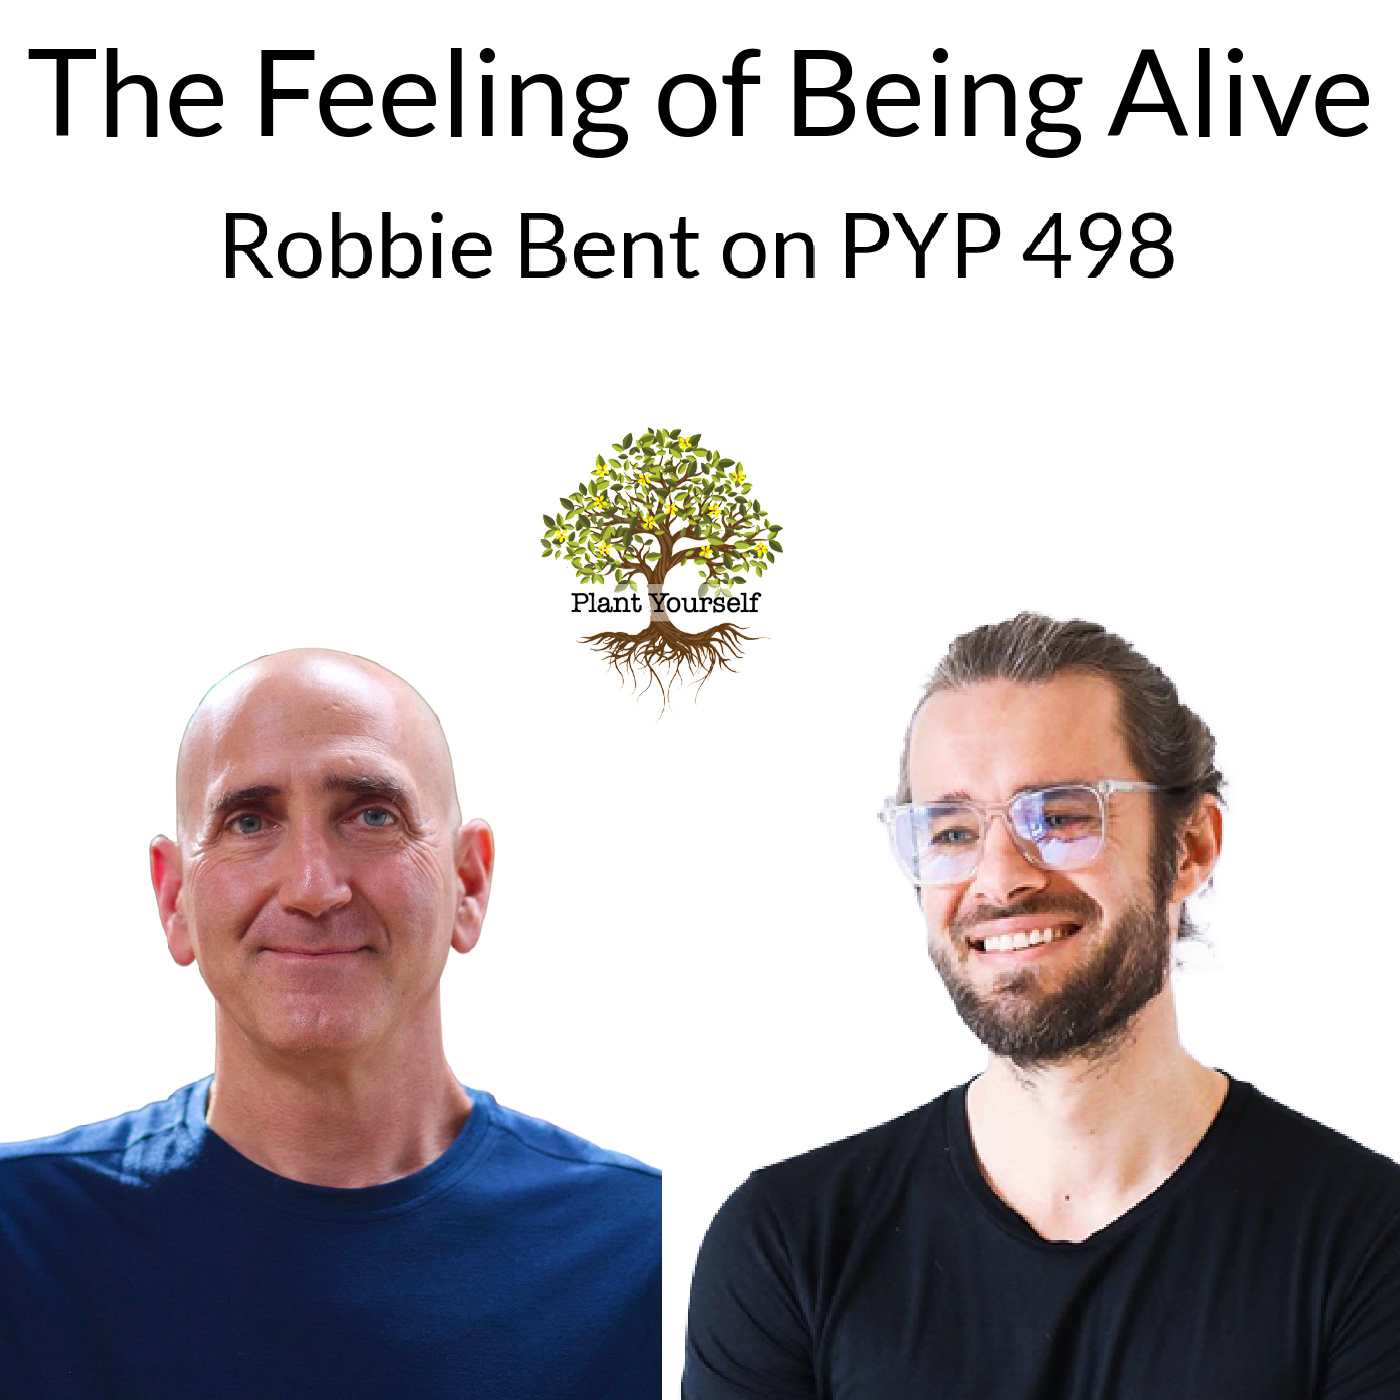 The Feeling of Being Alive: Robbie Bent on PYP 498